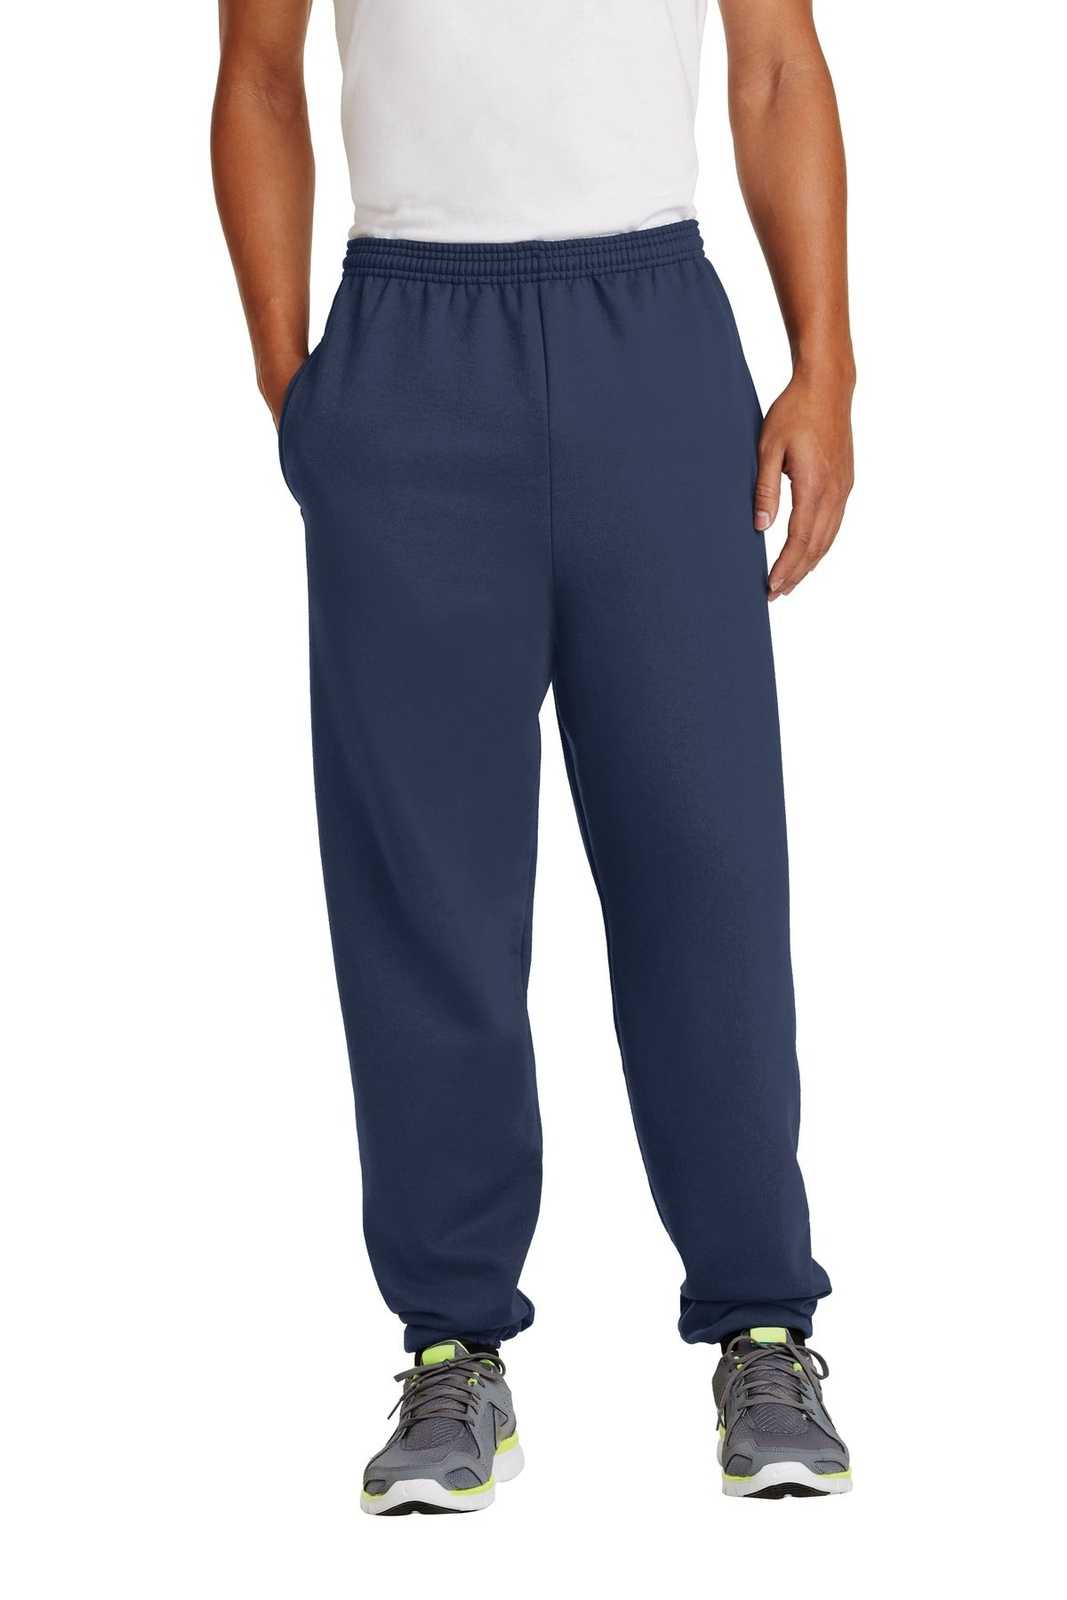 Port & Company PC90P Essential Fleece Sweatpant with Pockets - Navy - HIT a Double - 1